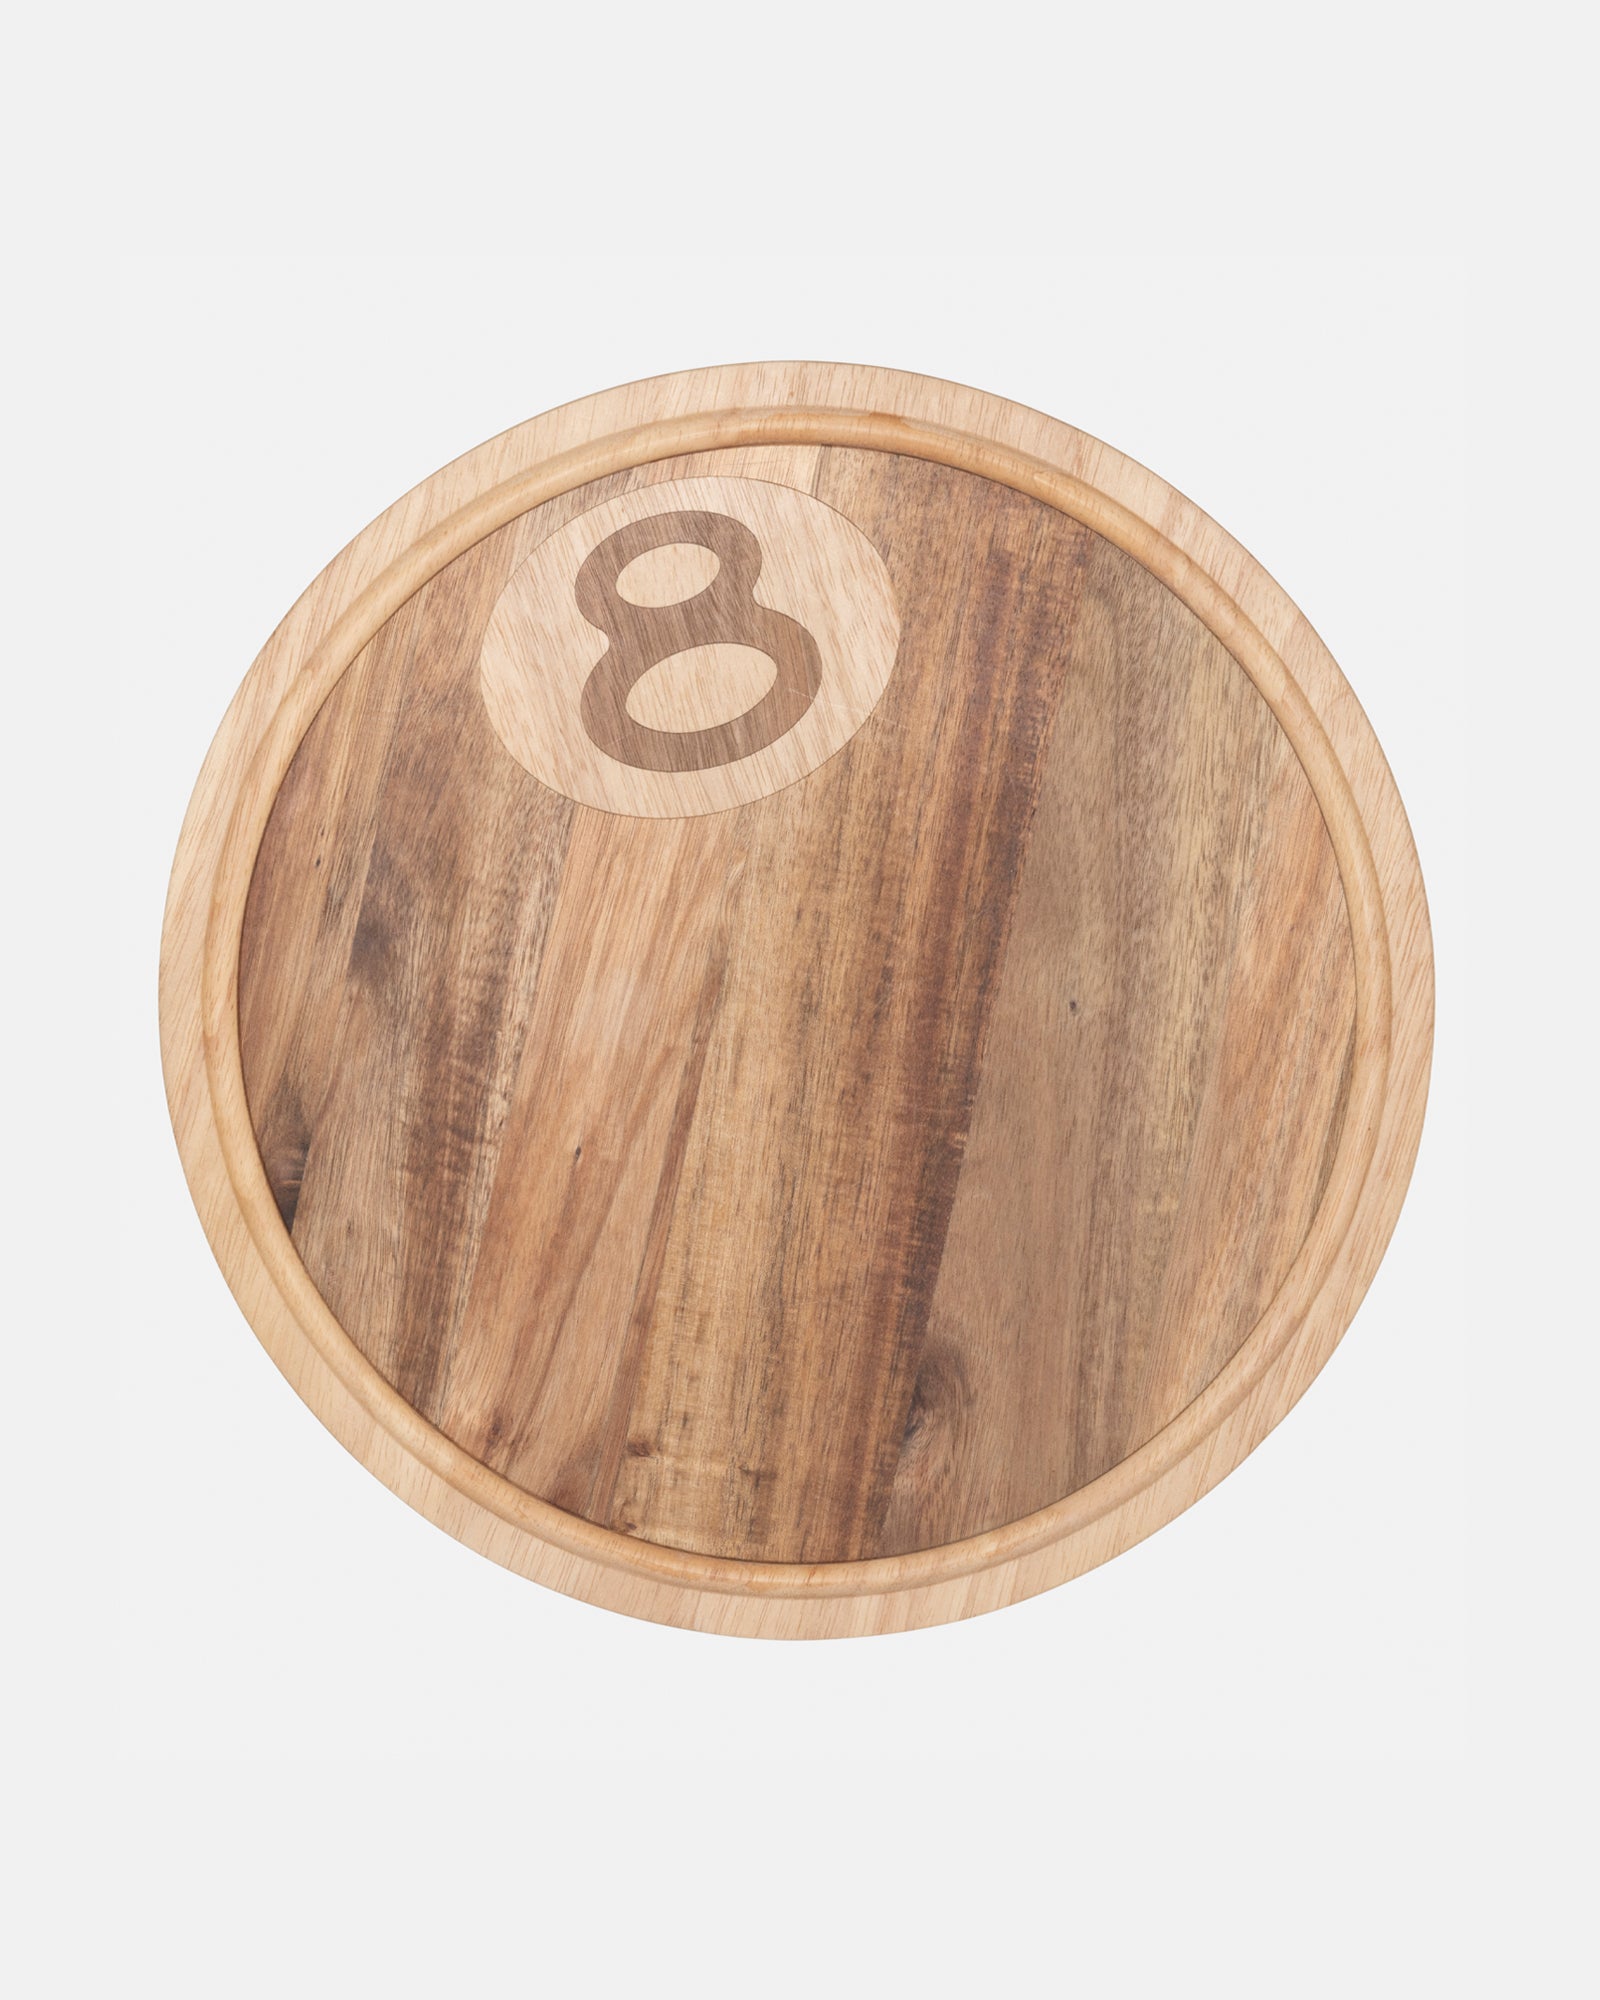 WOODEN 8 BALL BOARD WOOD MIX ACCESSORY